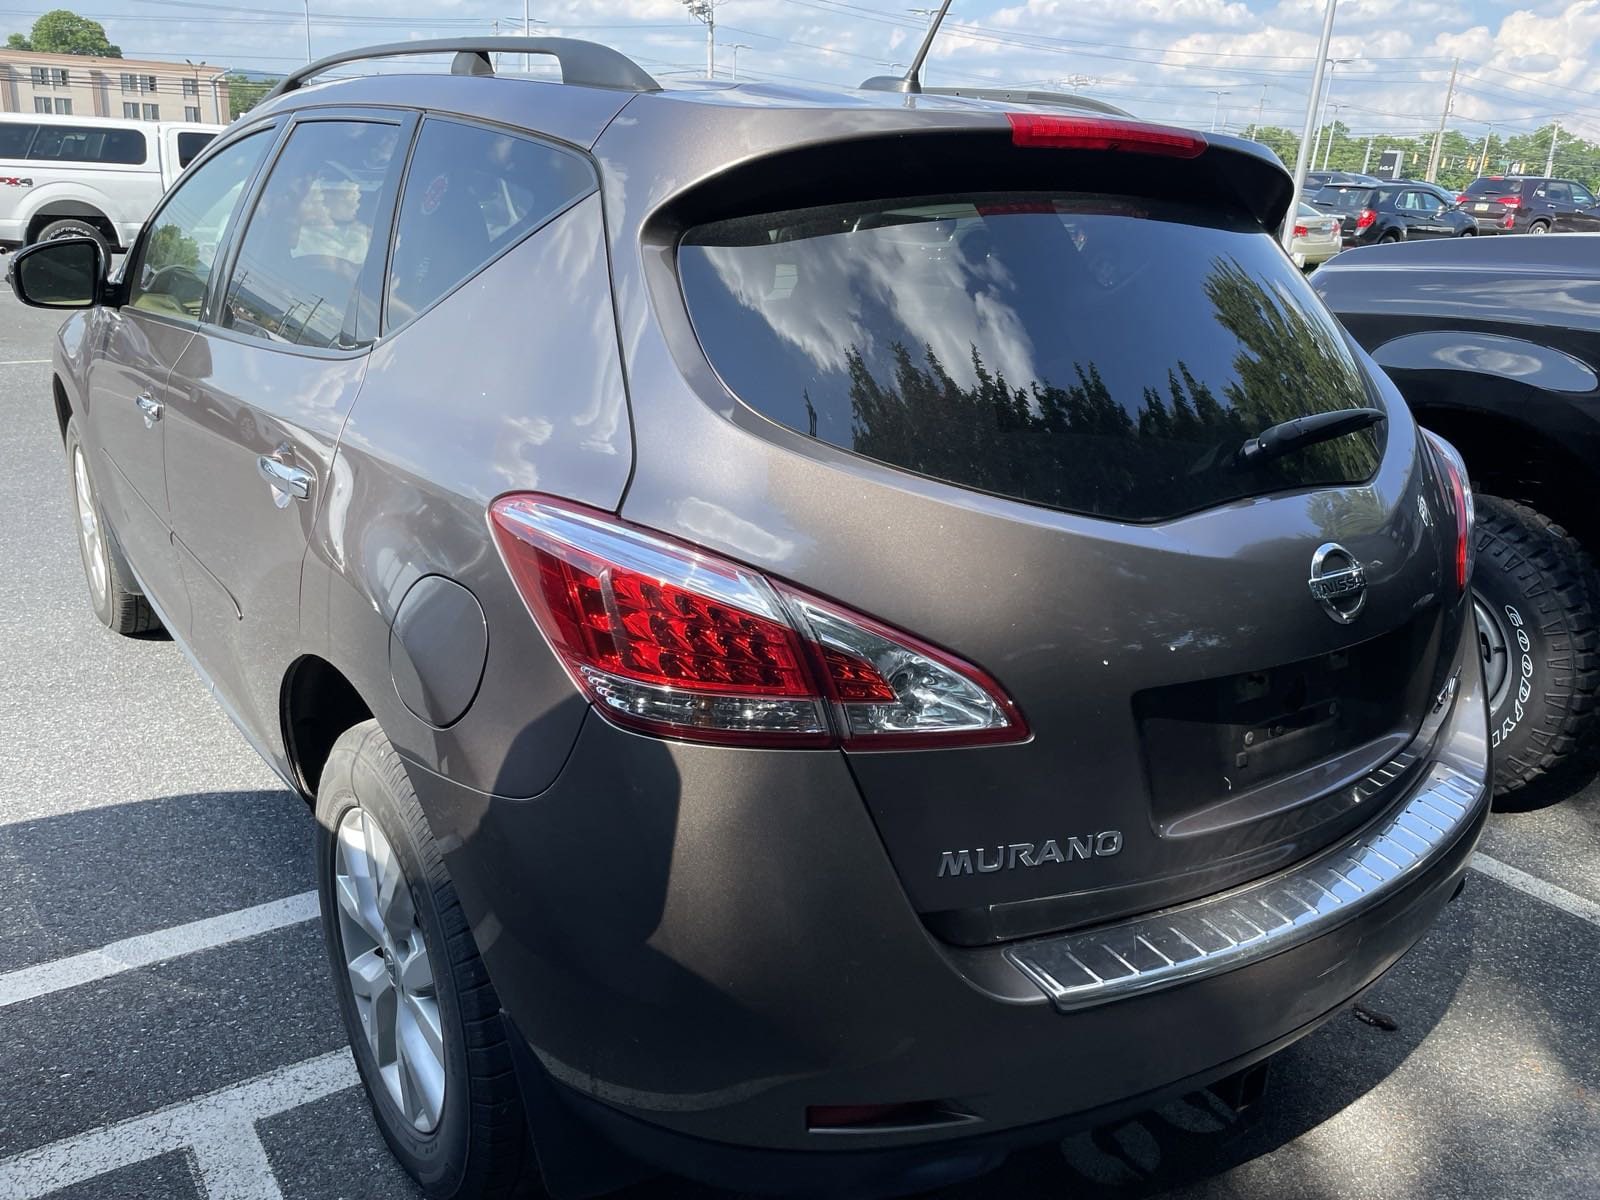 Used 2014 Nissan Murano For Sale at Fred Beans Lincoln | VIN 